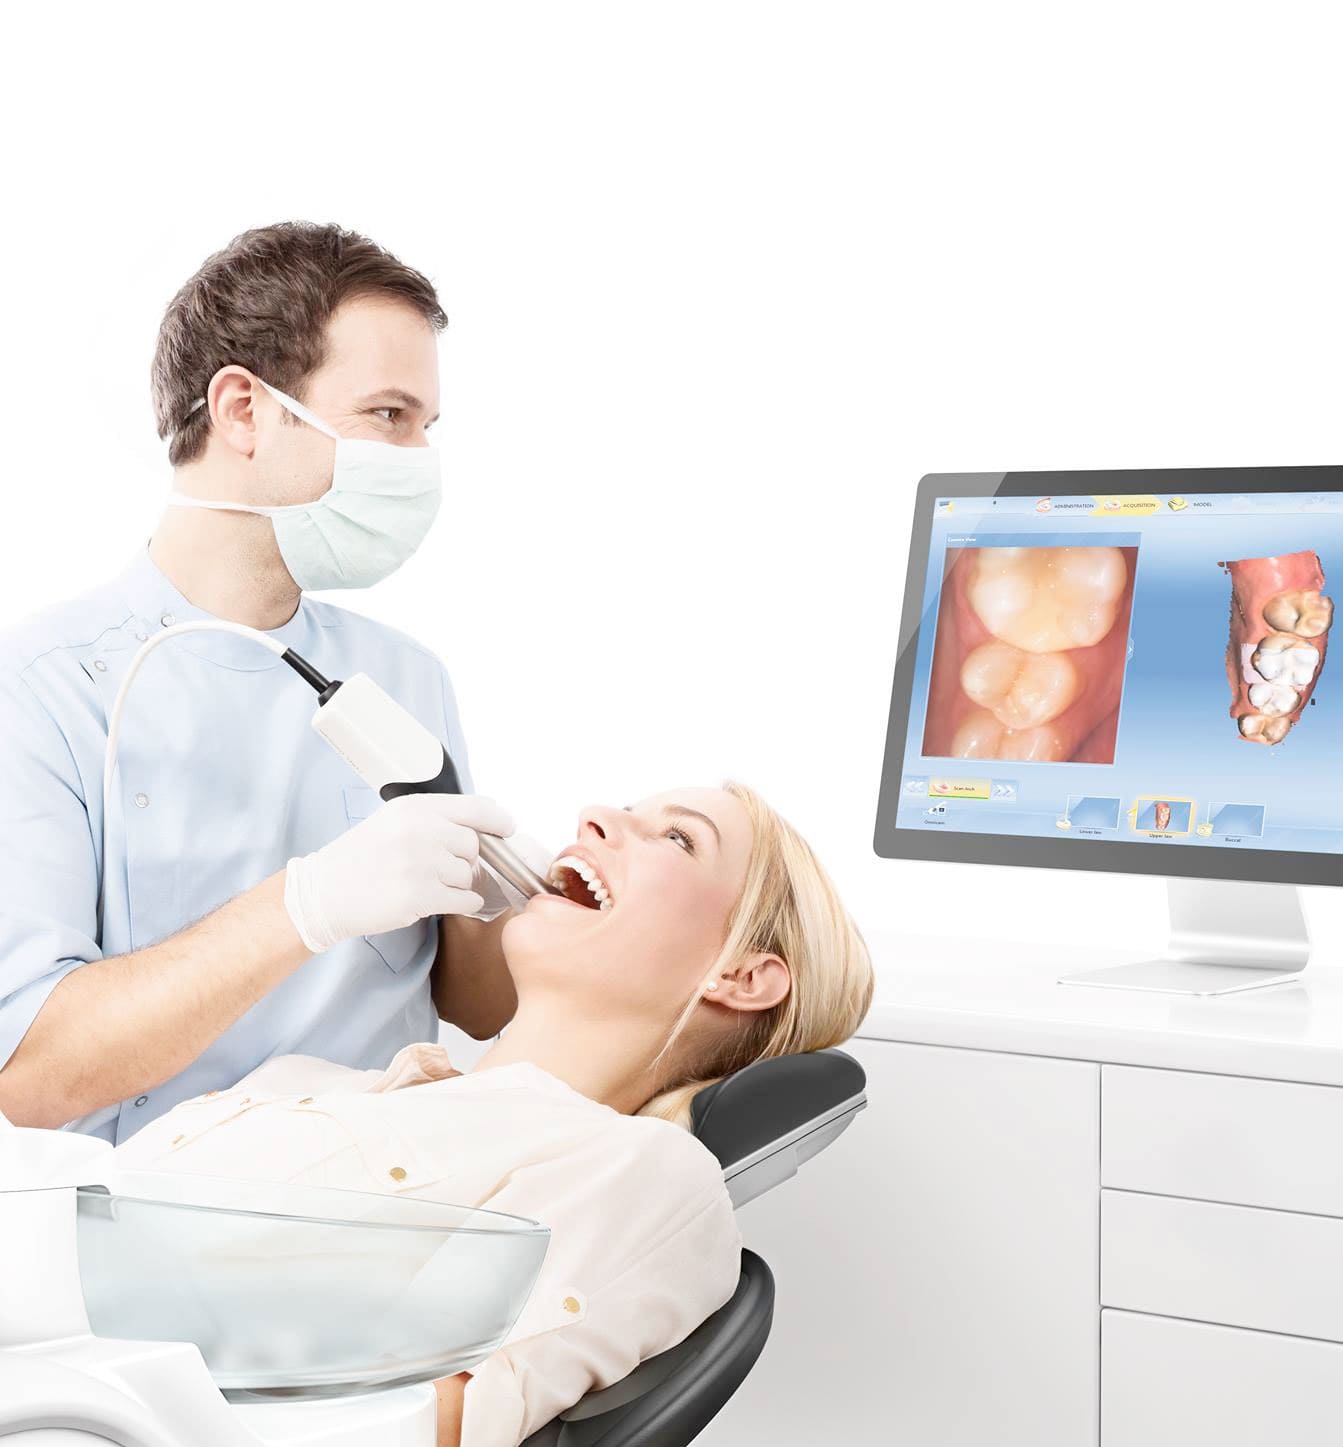 Dental diagnostic imaging with ultrasound is painless, affordable, non-invasive, and has no known adverse effects.